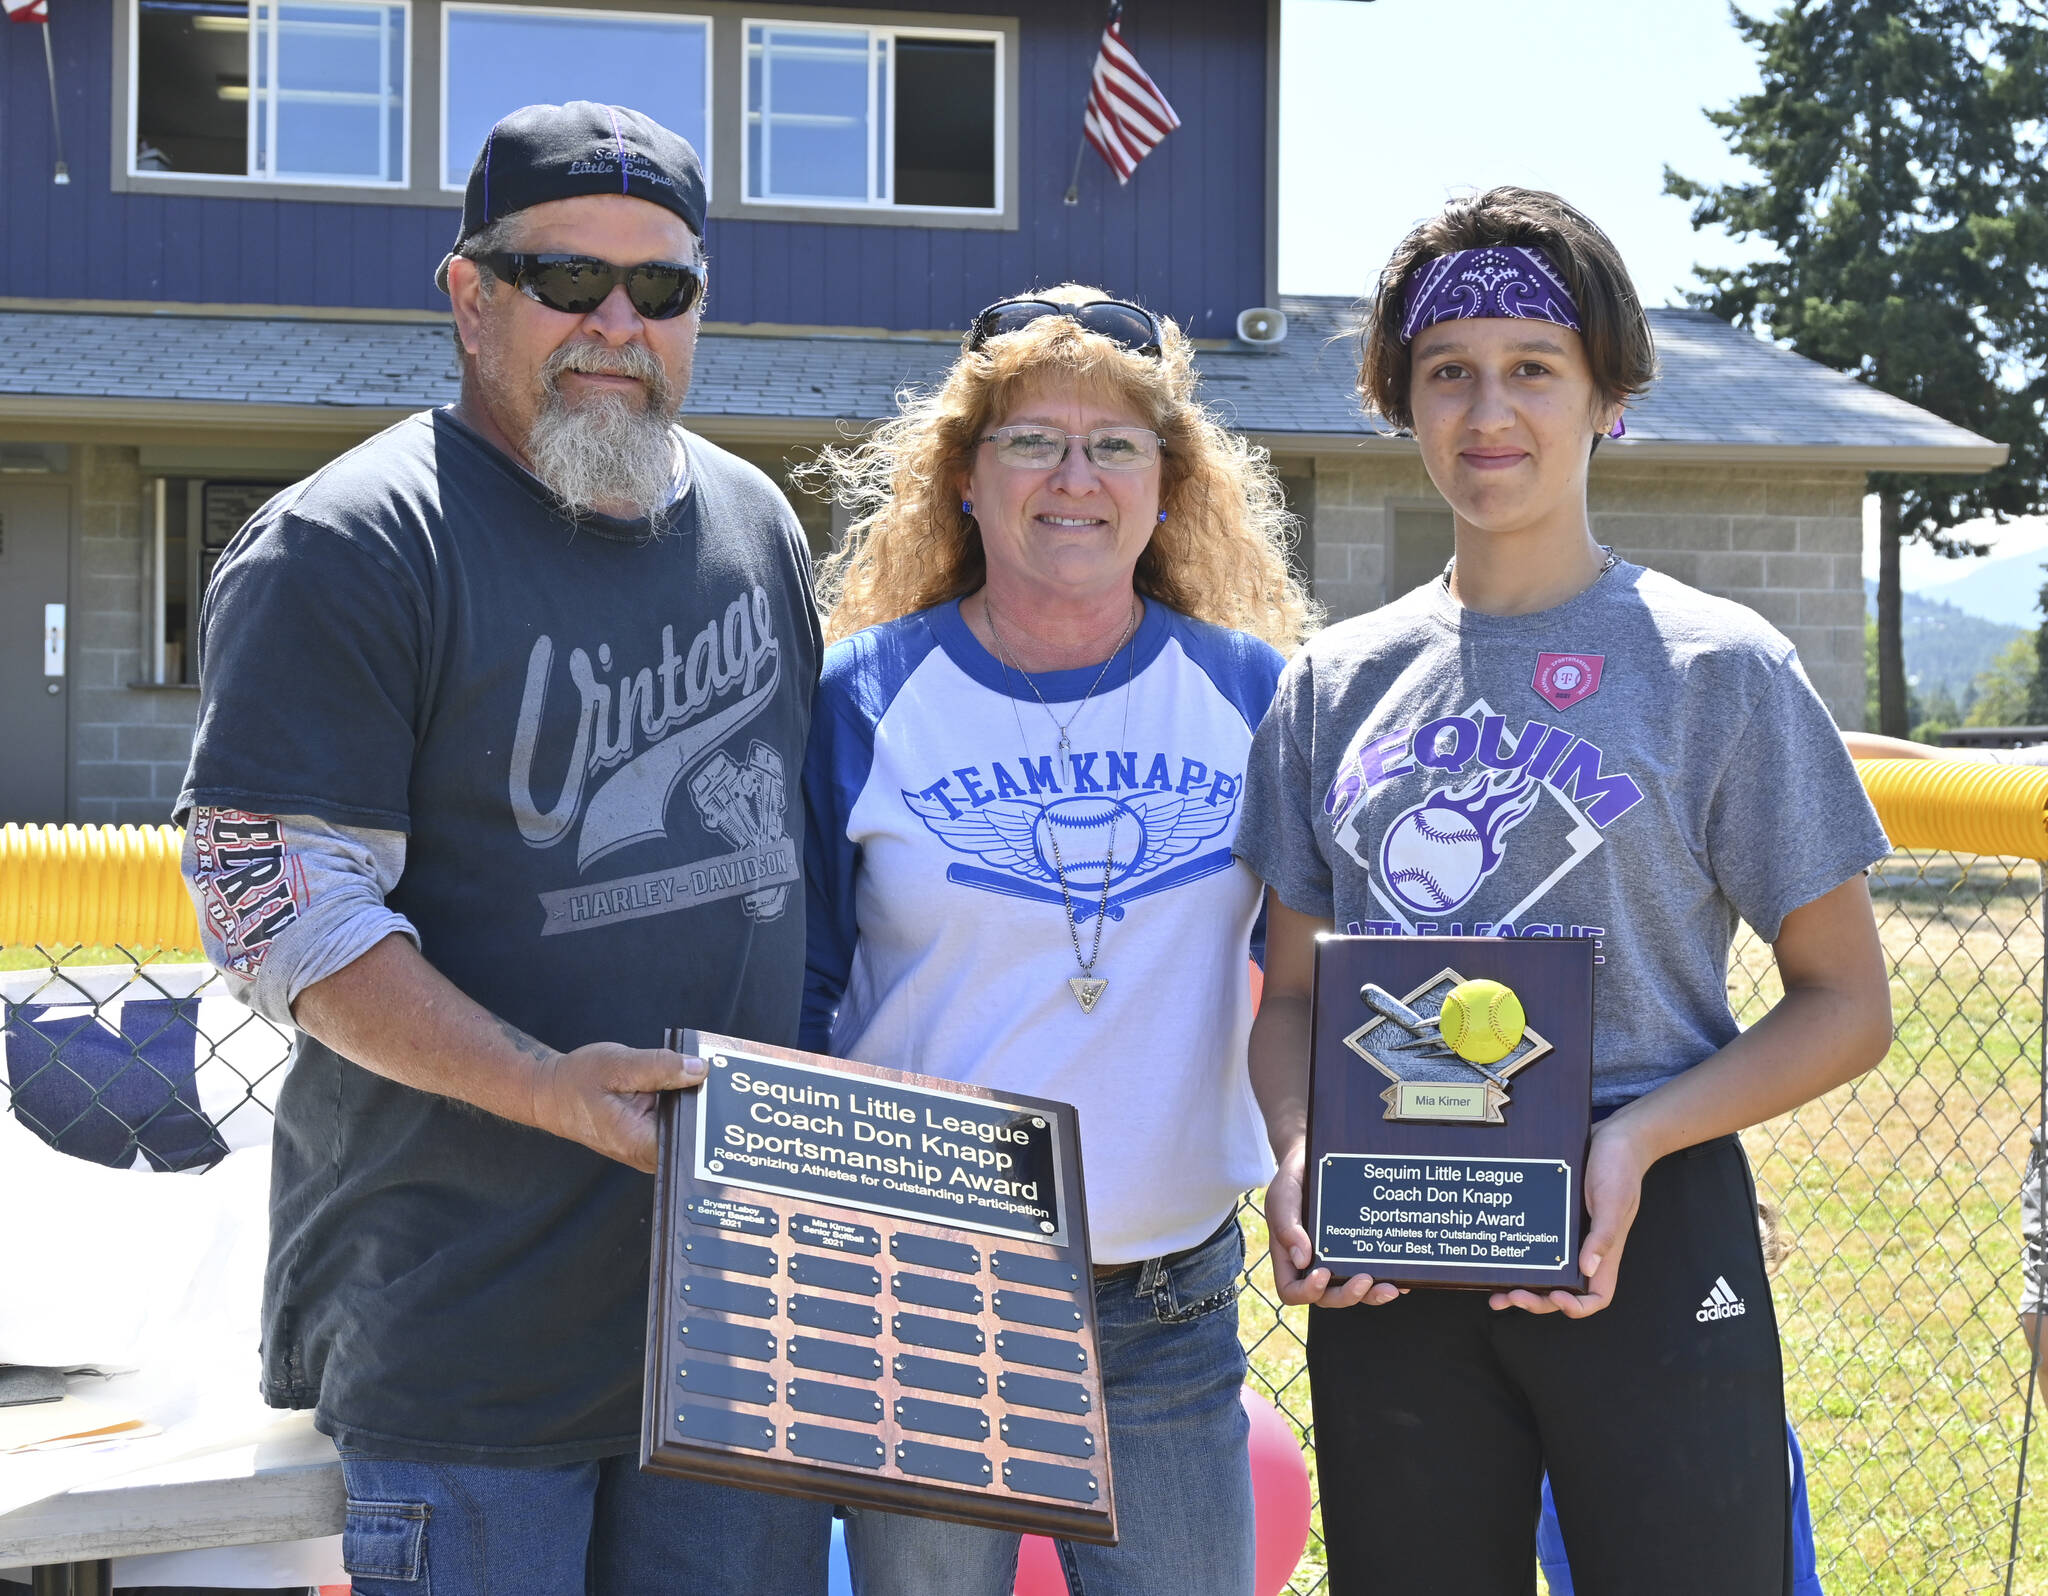 Sequim Little League softballer Mia Kirner, right, accepts the Don Knapp Sportsmanship Award from Tony and Brenda Knapp Bistline on July 10 at the league’s season-ending ceremonies. In part to honor the legacy of longtime volunteer/advocate Don Knapp, who passed away in November 2020, the league created the sportsmanship award for one baseball player and one softball player. Kirner and baseballer Bryant Laboy (who received the award at a separate ceremony) are the first recipients. Sequim Gazette photo by Michael Dashiell